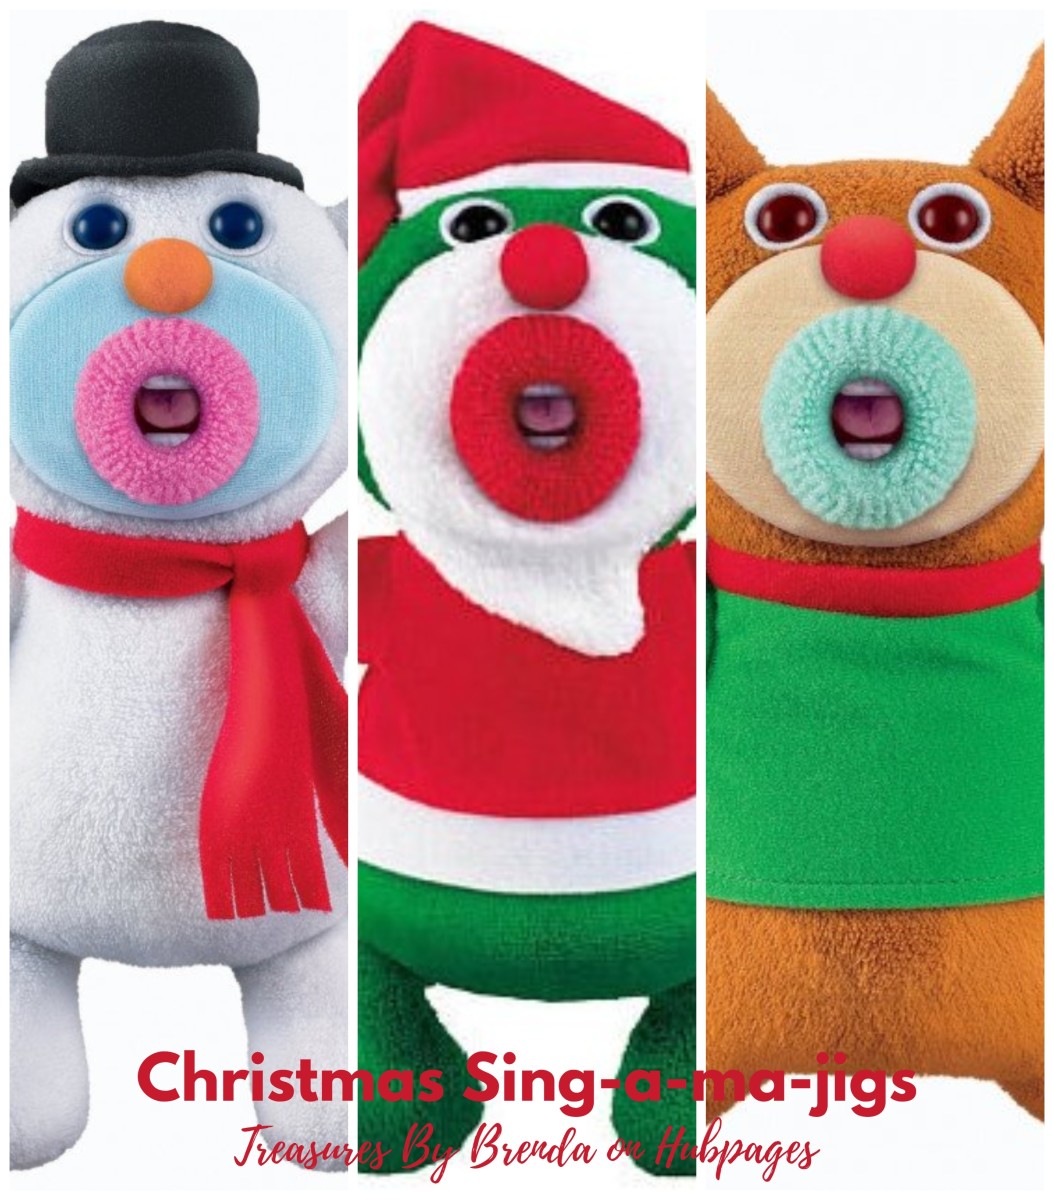 Fisher-Price's Christmas Sing-a-Ma-Jigs